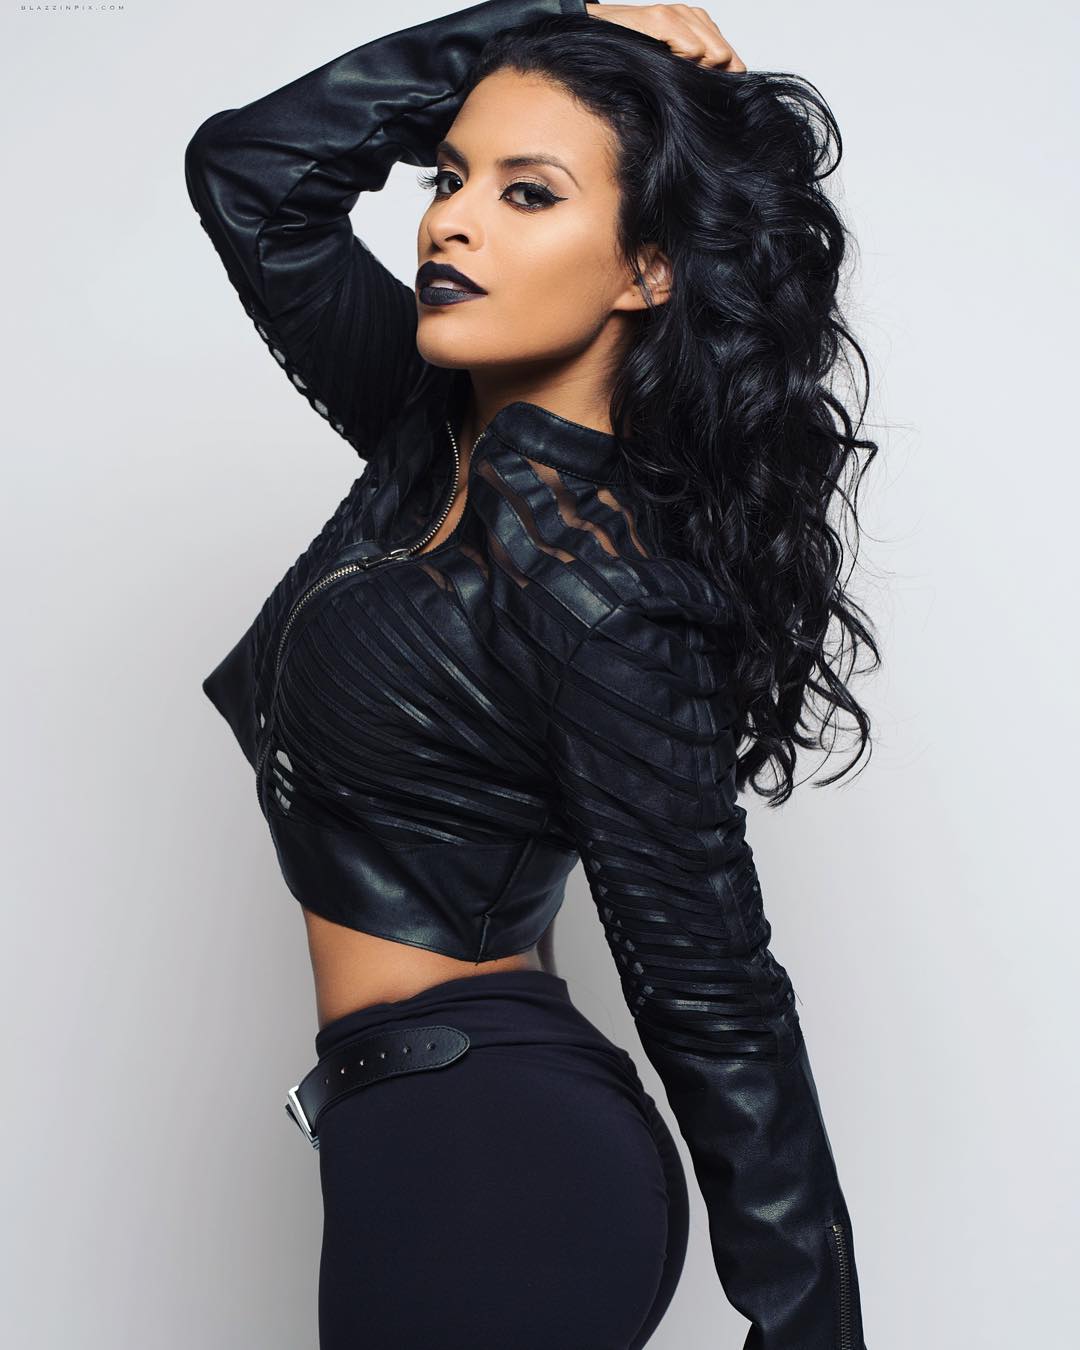 60+ Sexy Zelina Vega Boobs Pictures That Will Make You Grab Your Screen | Best Of Comic Books